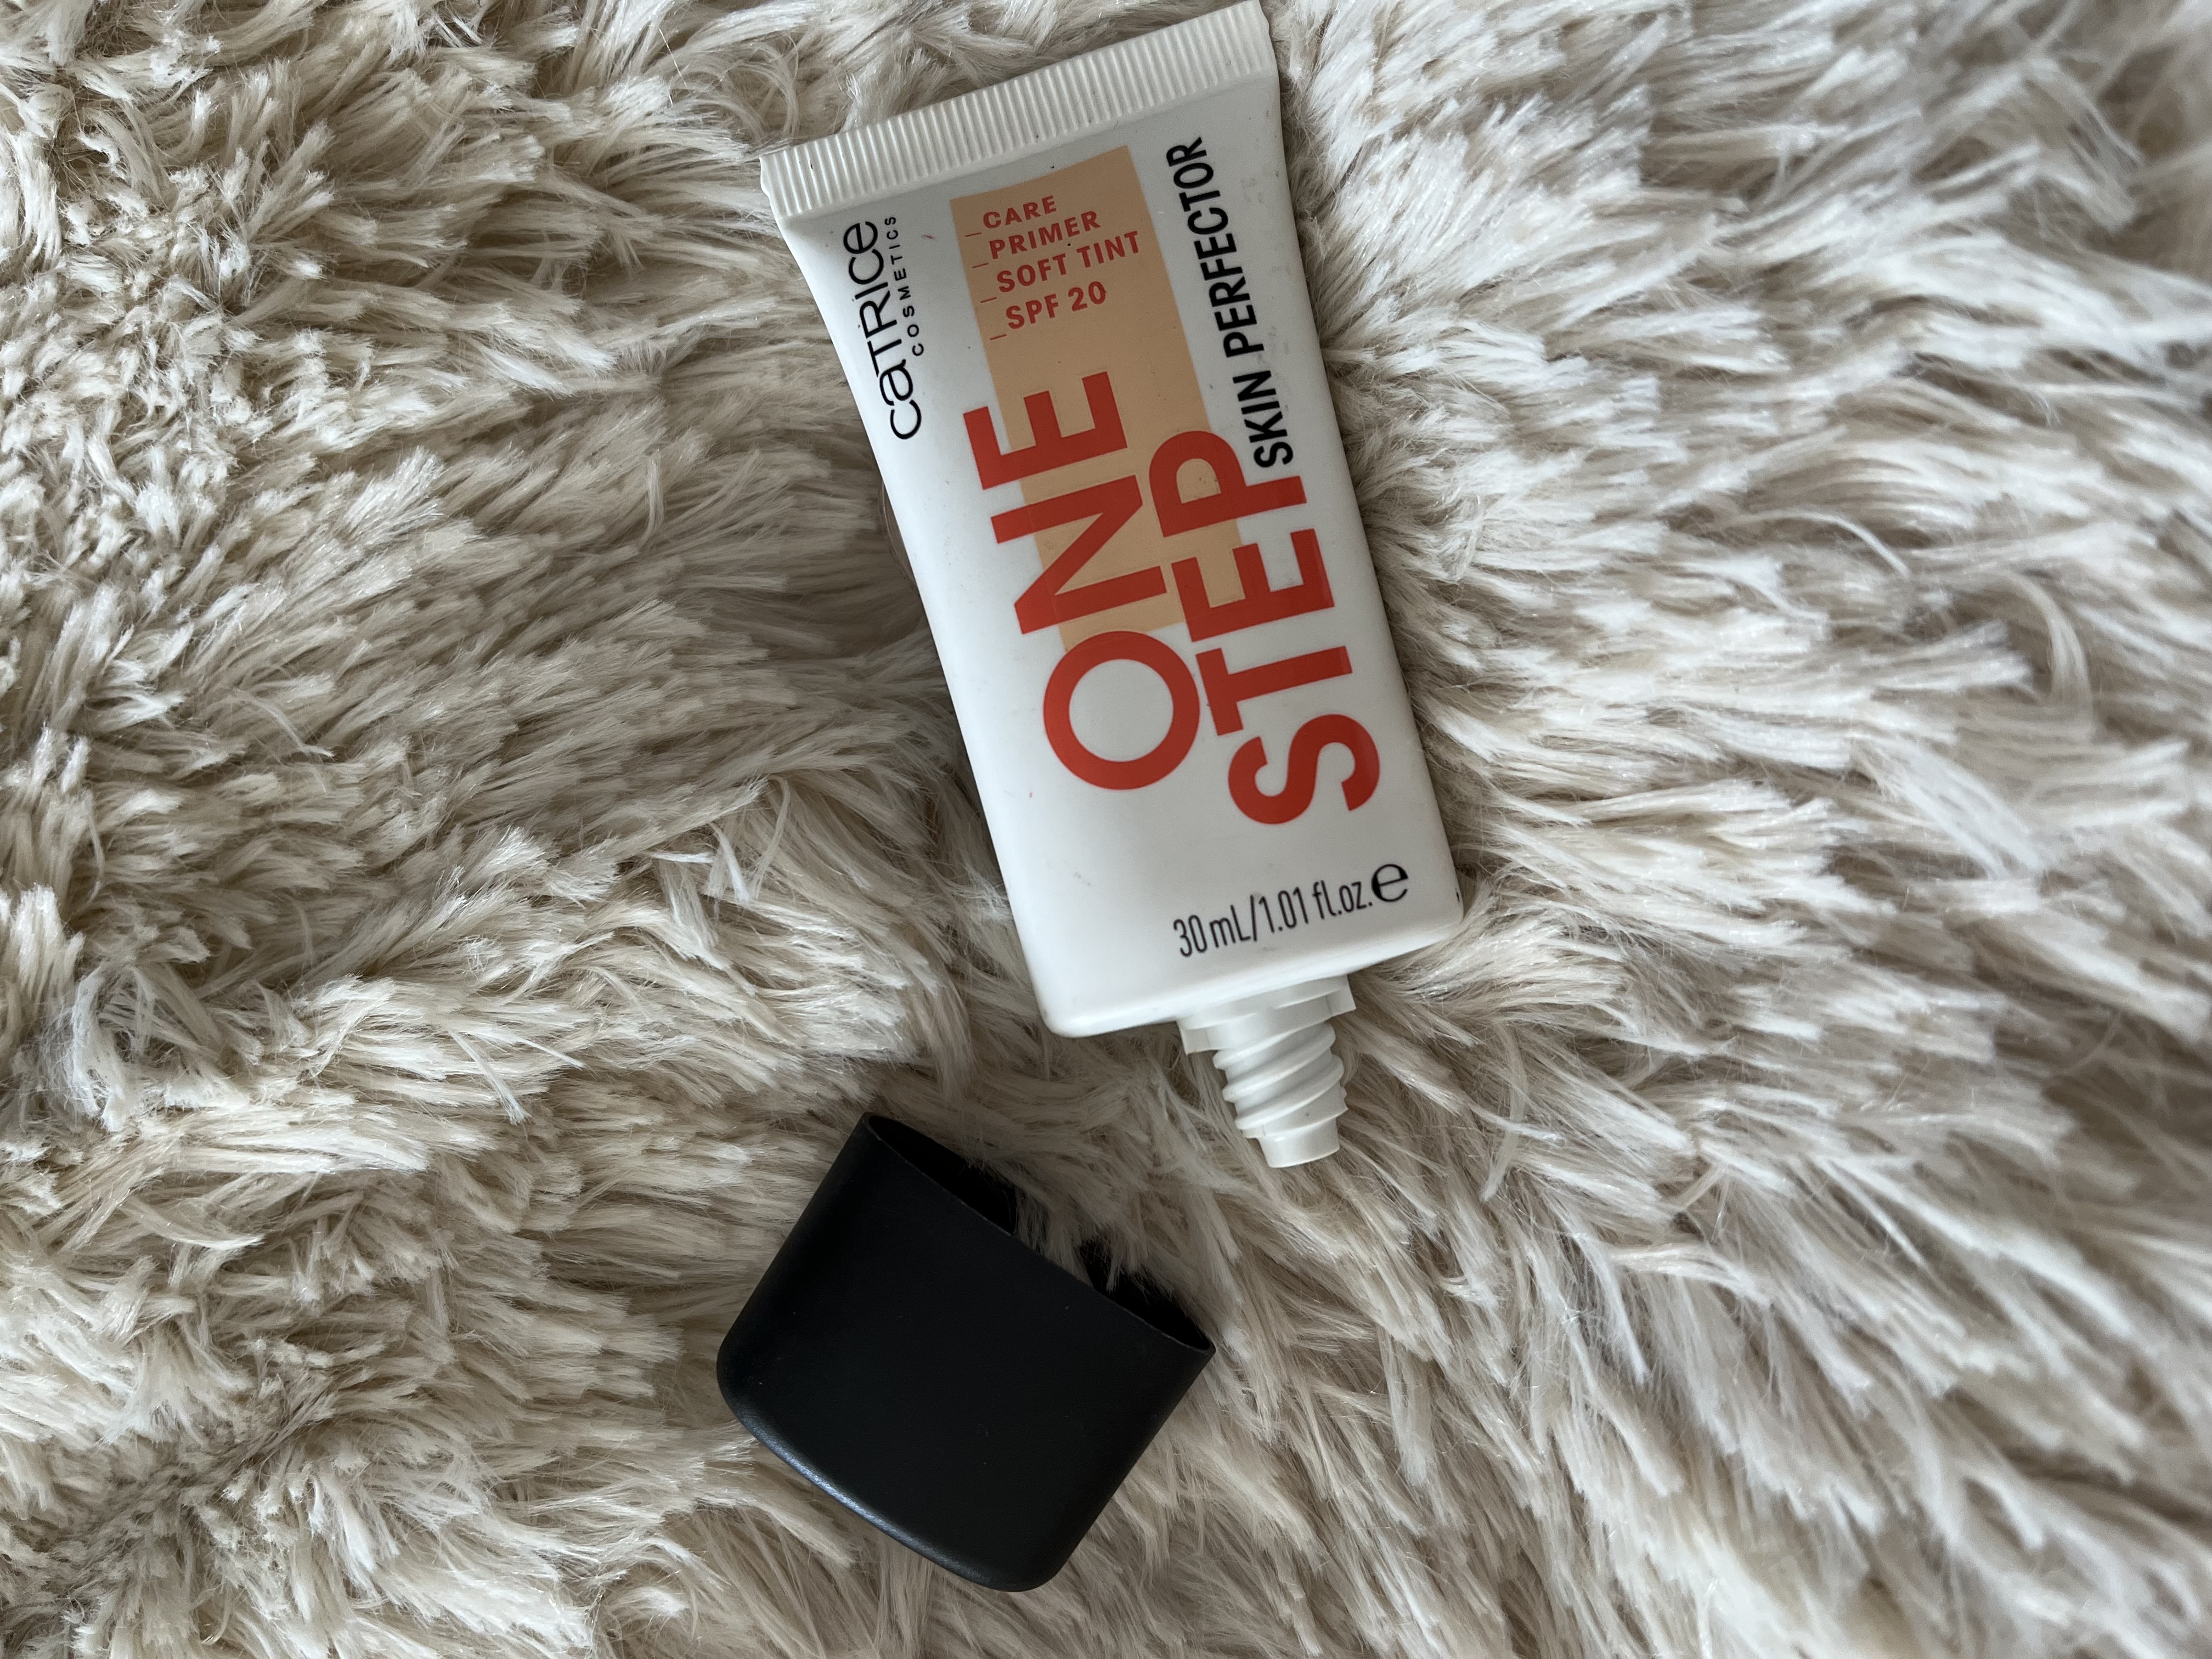 “ One Step Skin Perfector” Catrice